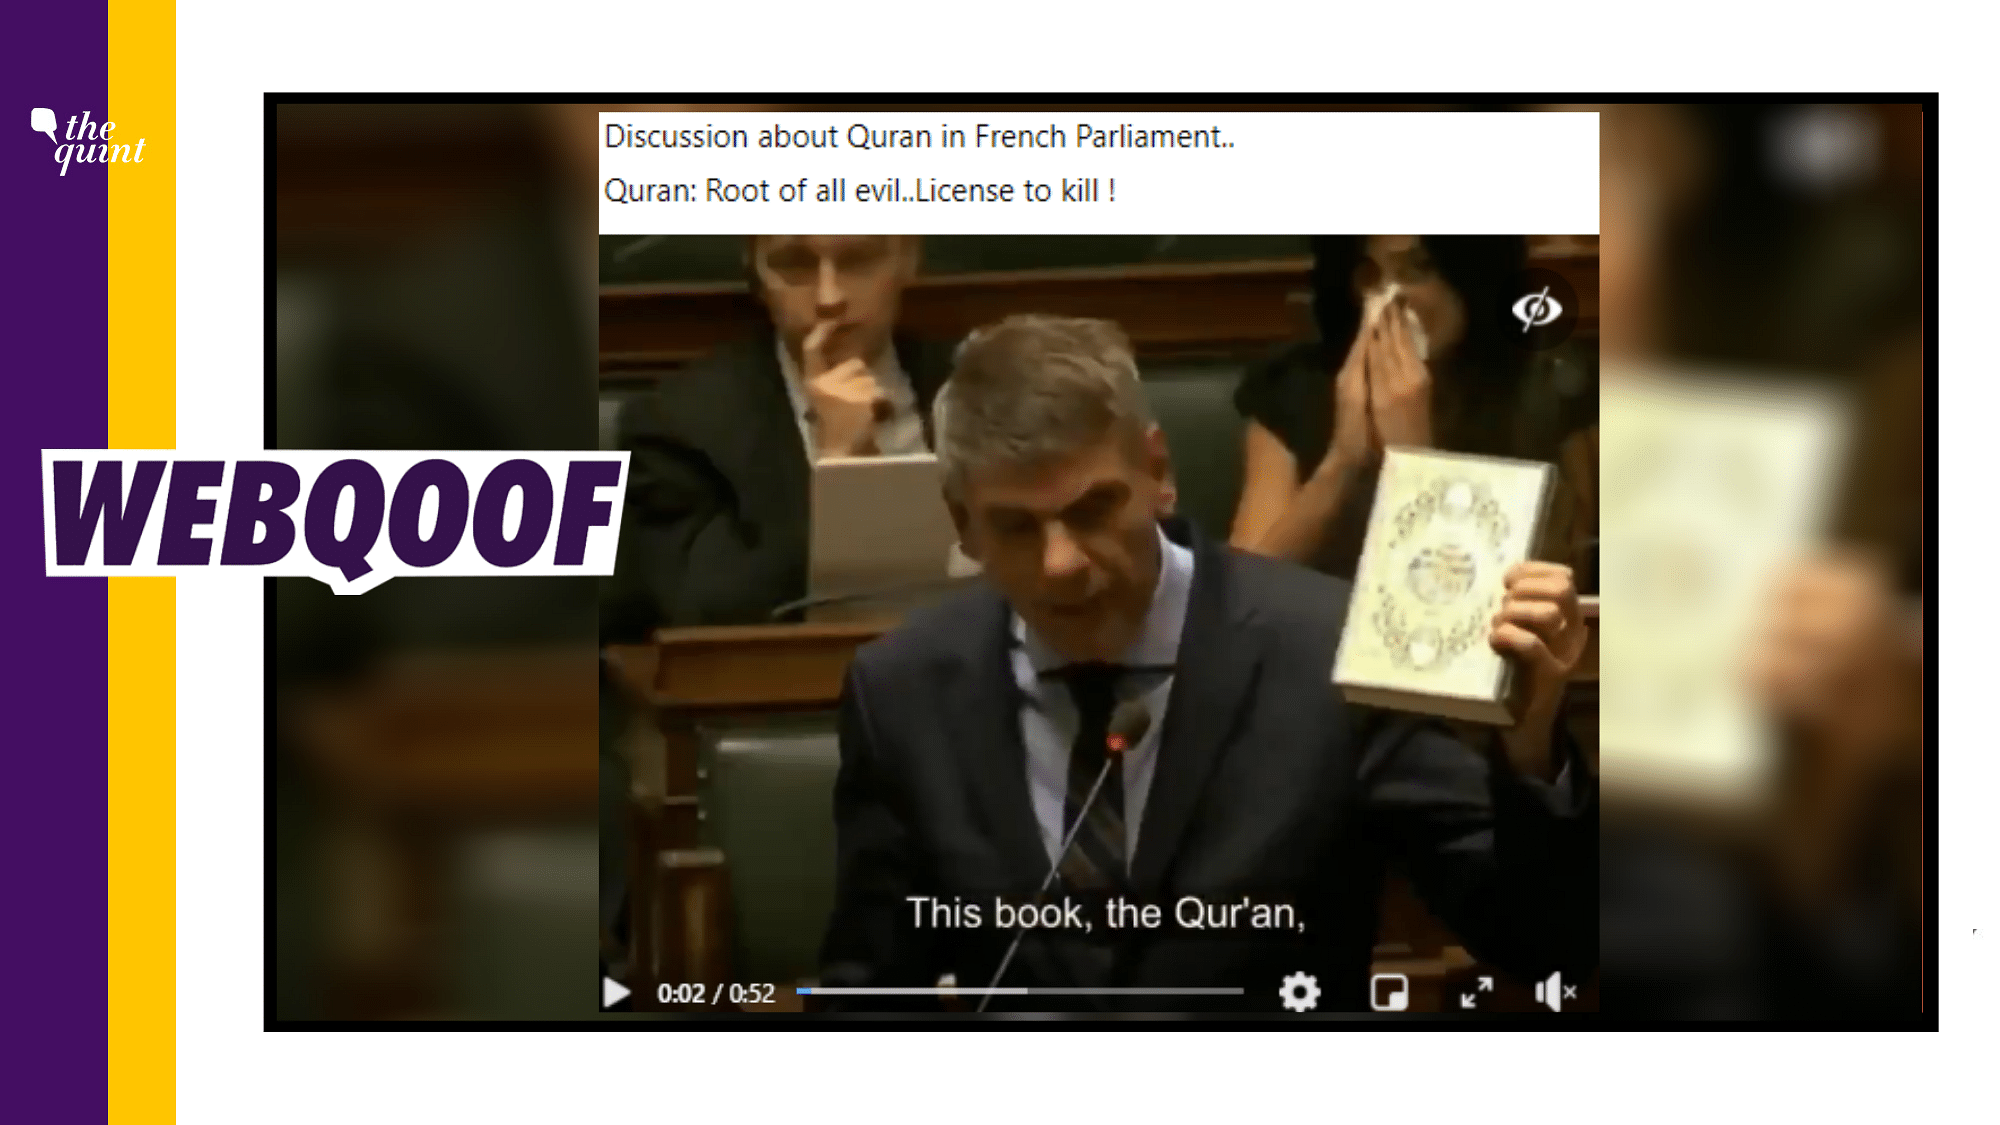 An old 2015 video of Filip Dewinter remarks in the Belgian Parliament has been revived as a recent discussion on Quran in the French Parliament.